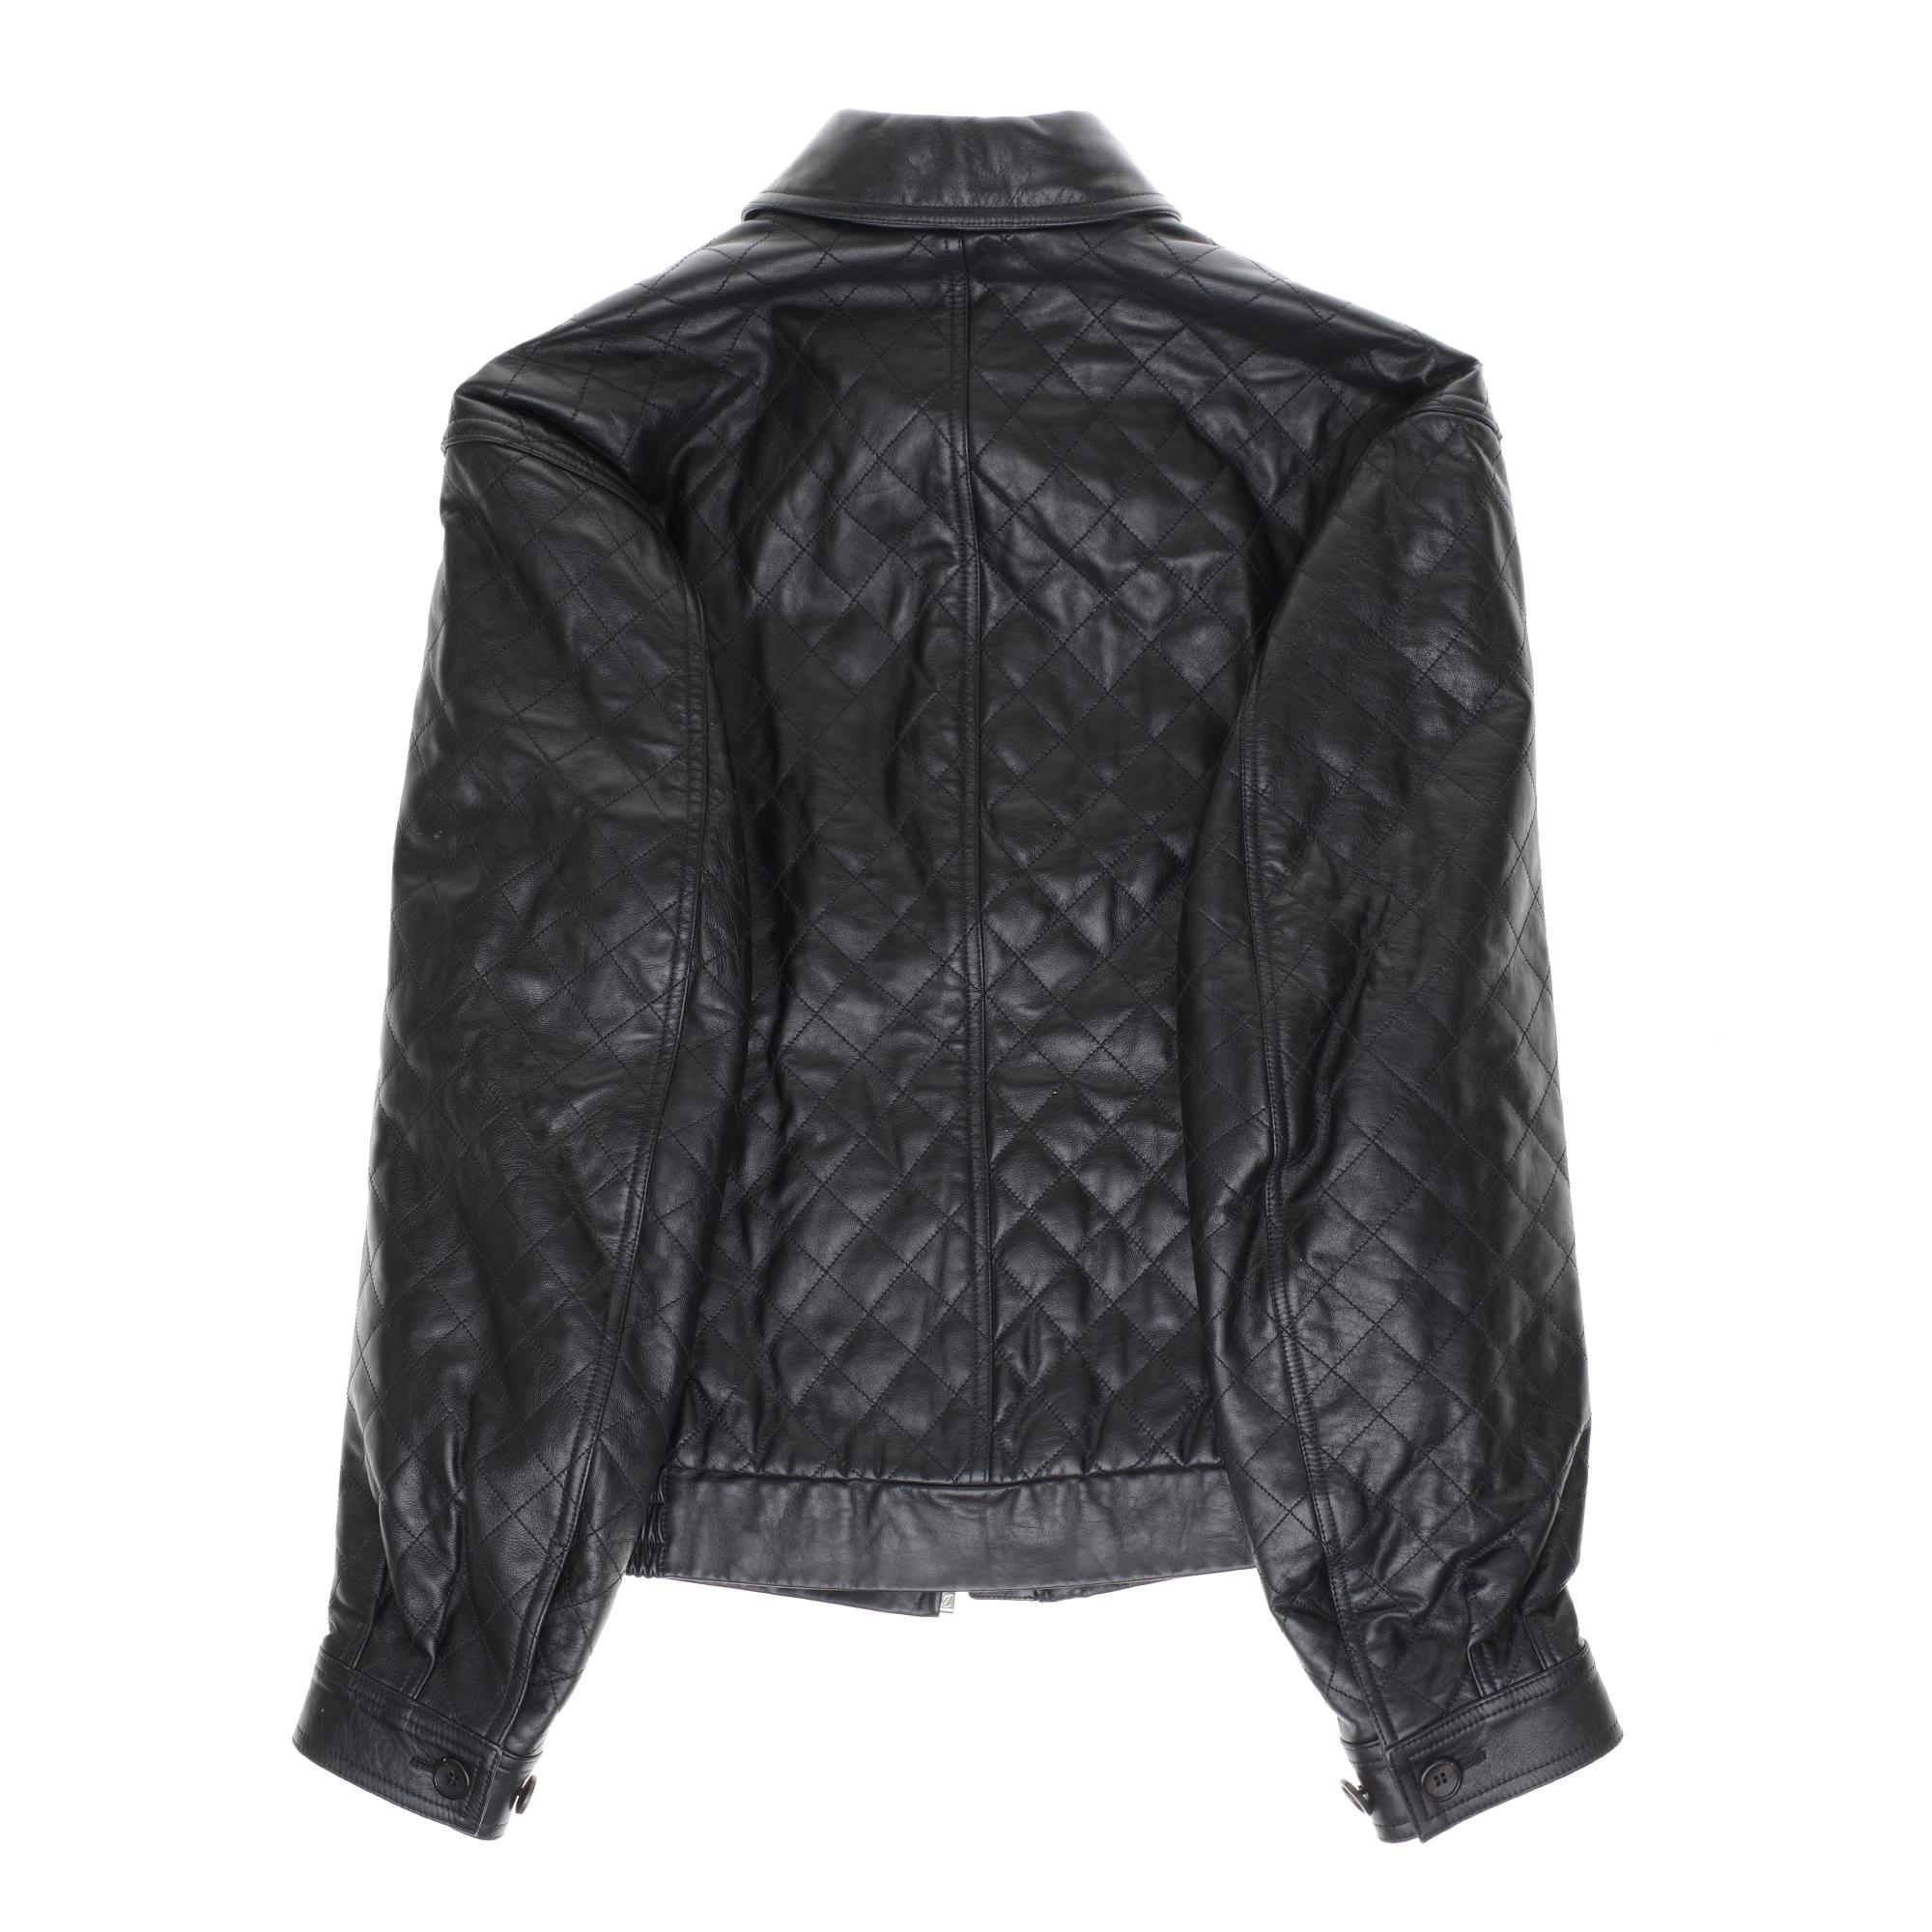 Stunning Louis Vuitton men’s jacket in black quilted calfskin leather, small collar with buttoned drawtab, zippered closure, 2 long sleeve pockets.

Signature: 